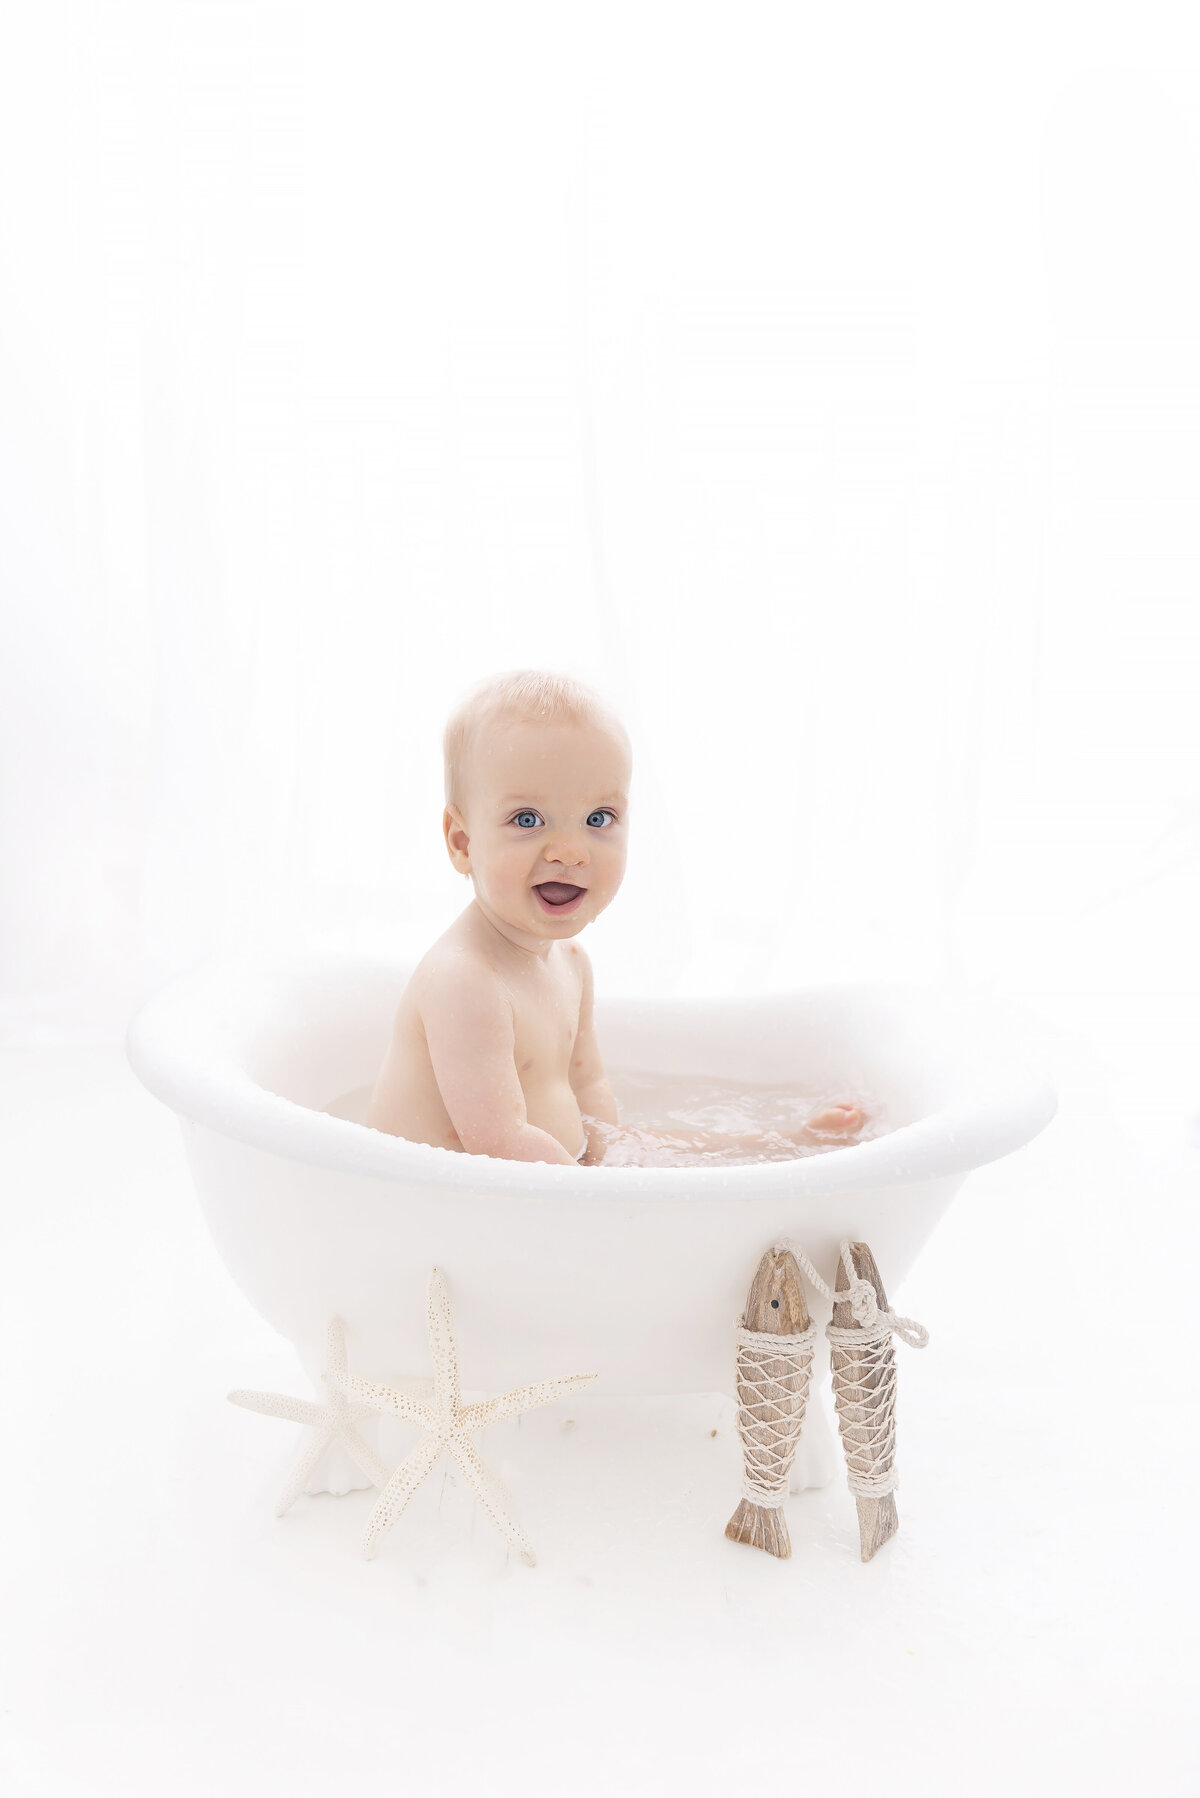 A toddler boy plays in a bathtub with a smile in a studio